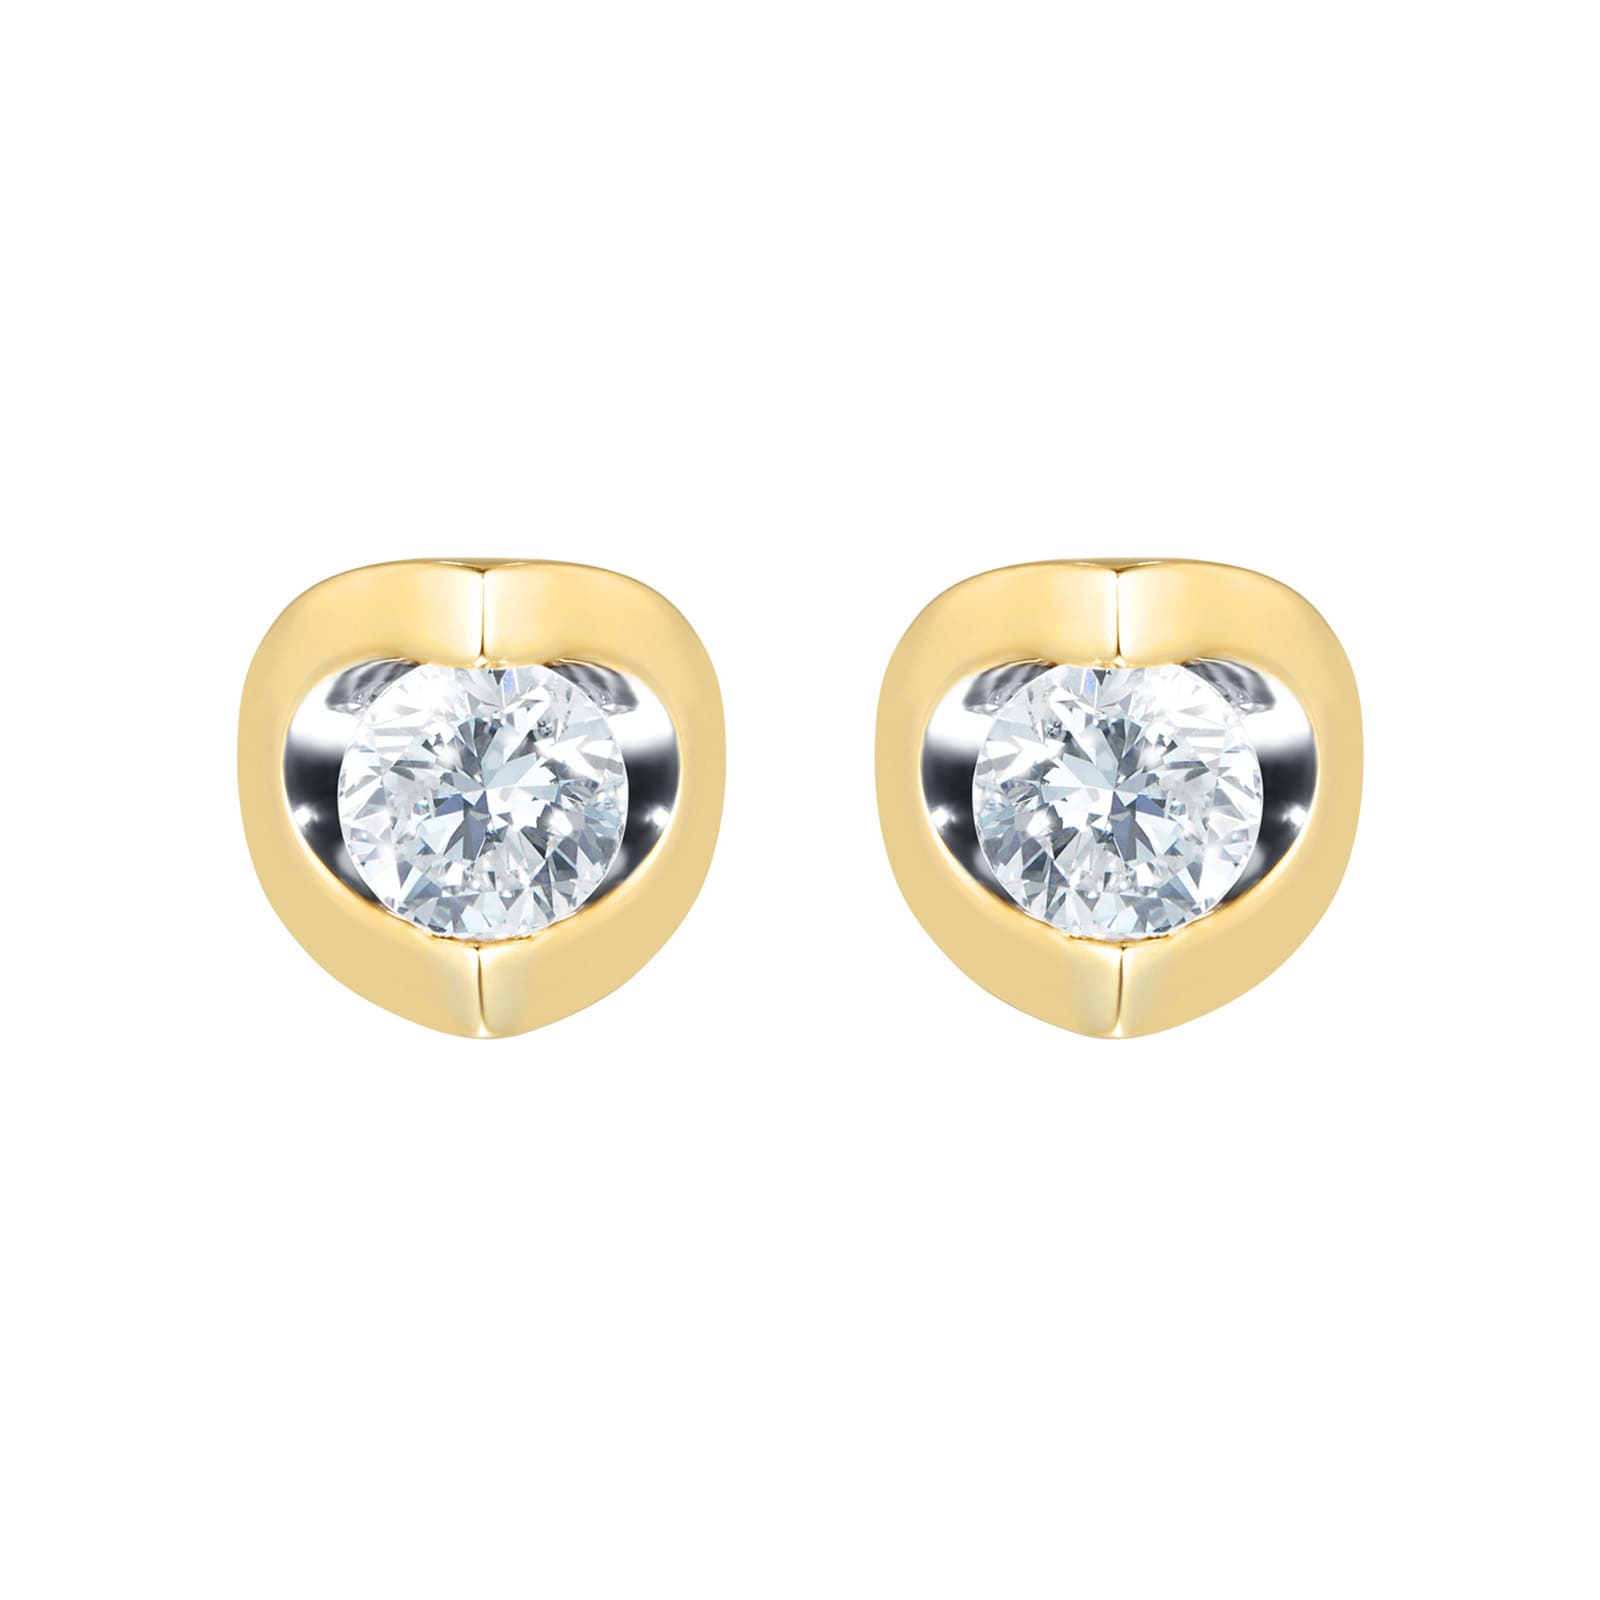 9ct Yellow Gold 0.25ct Tension Set Goldsmiths Brightest Diamond Earrings